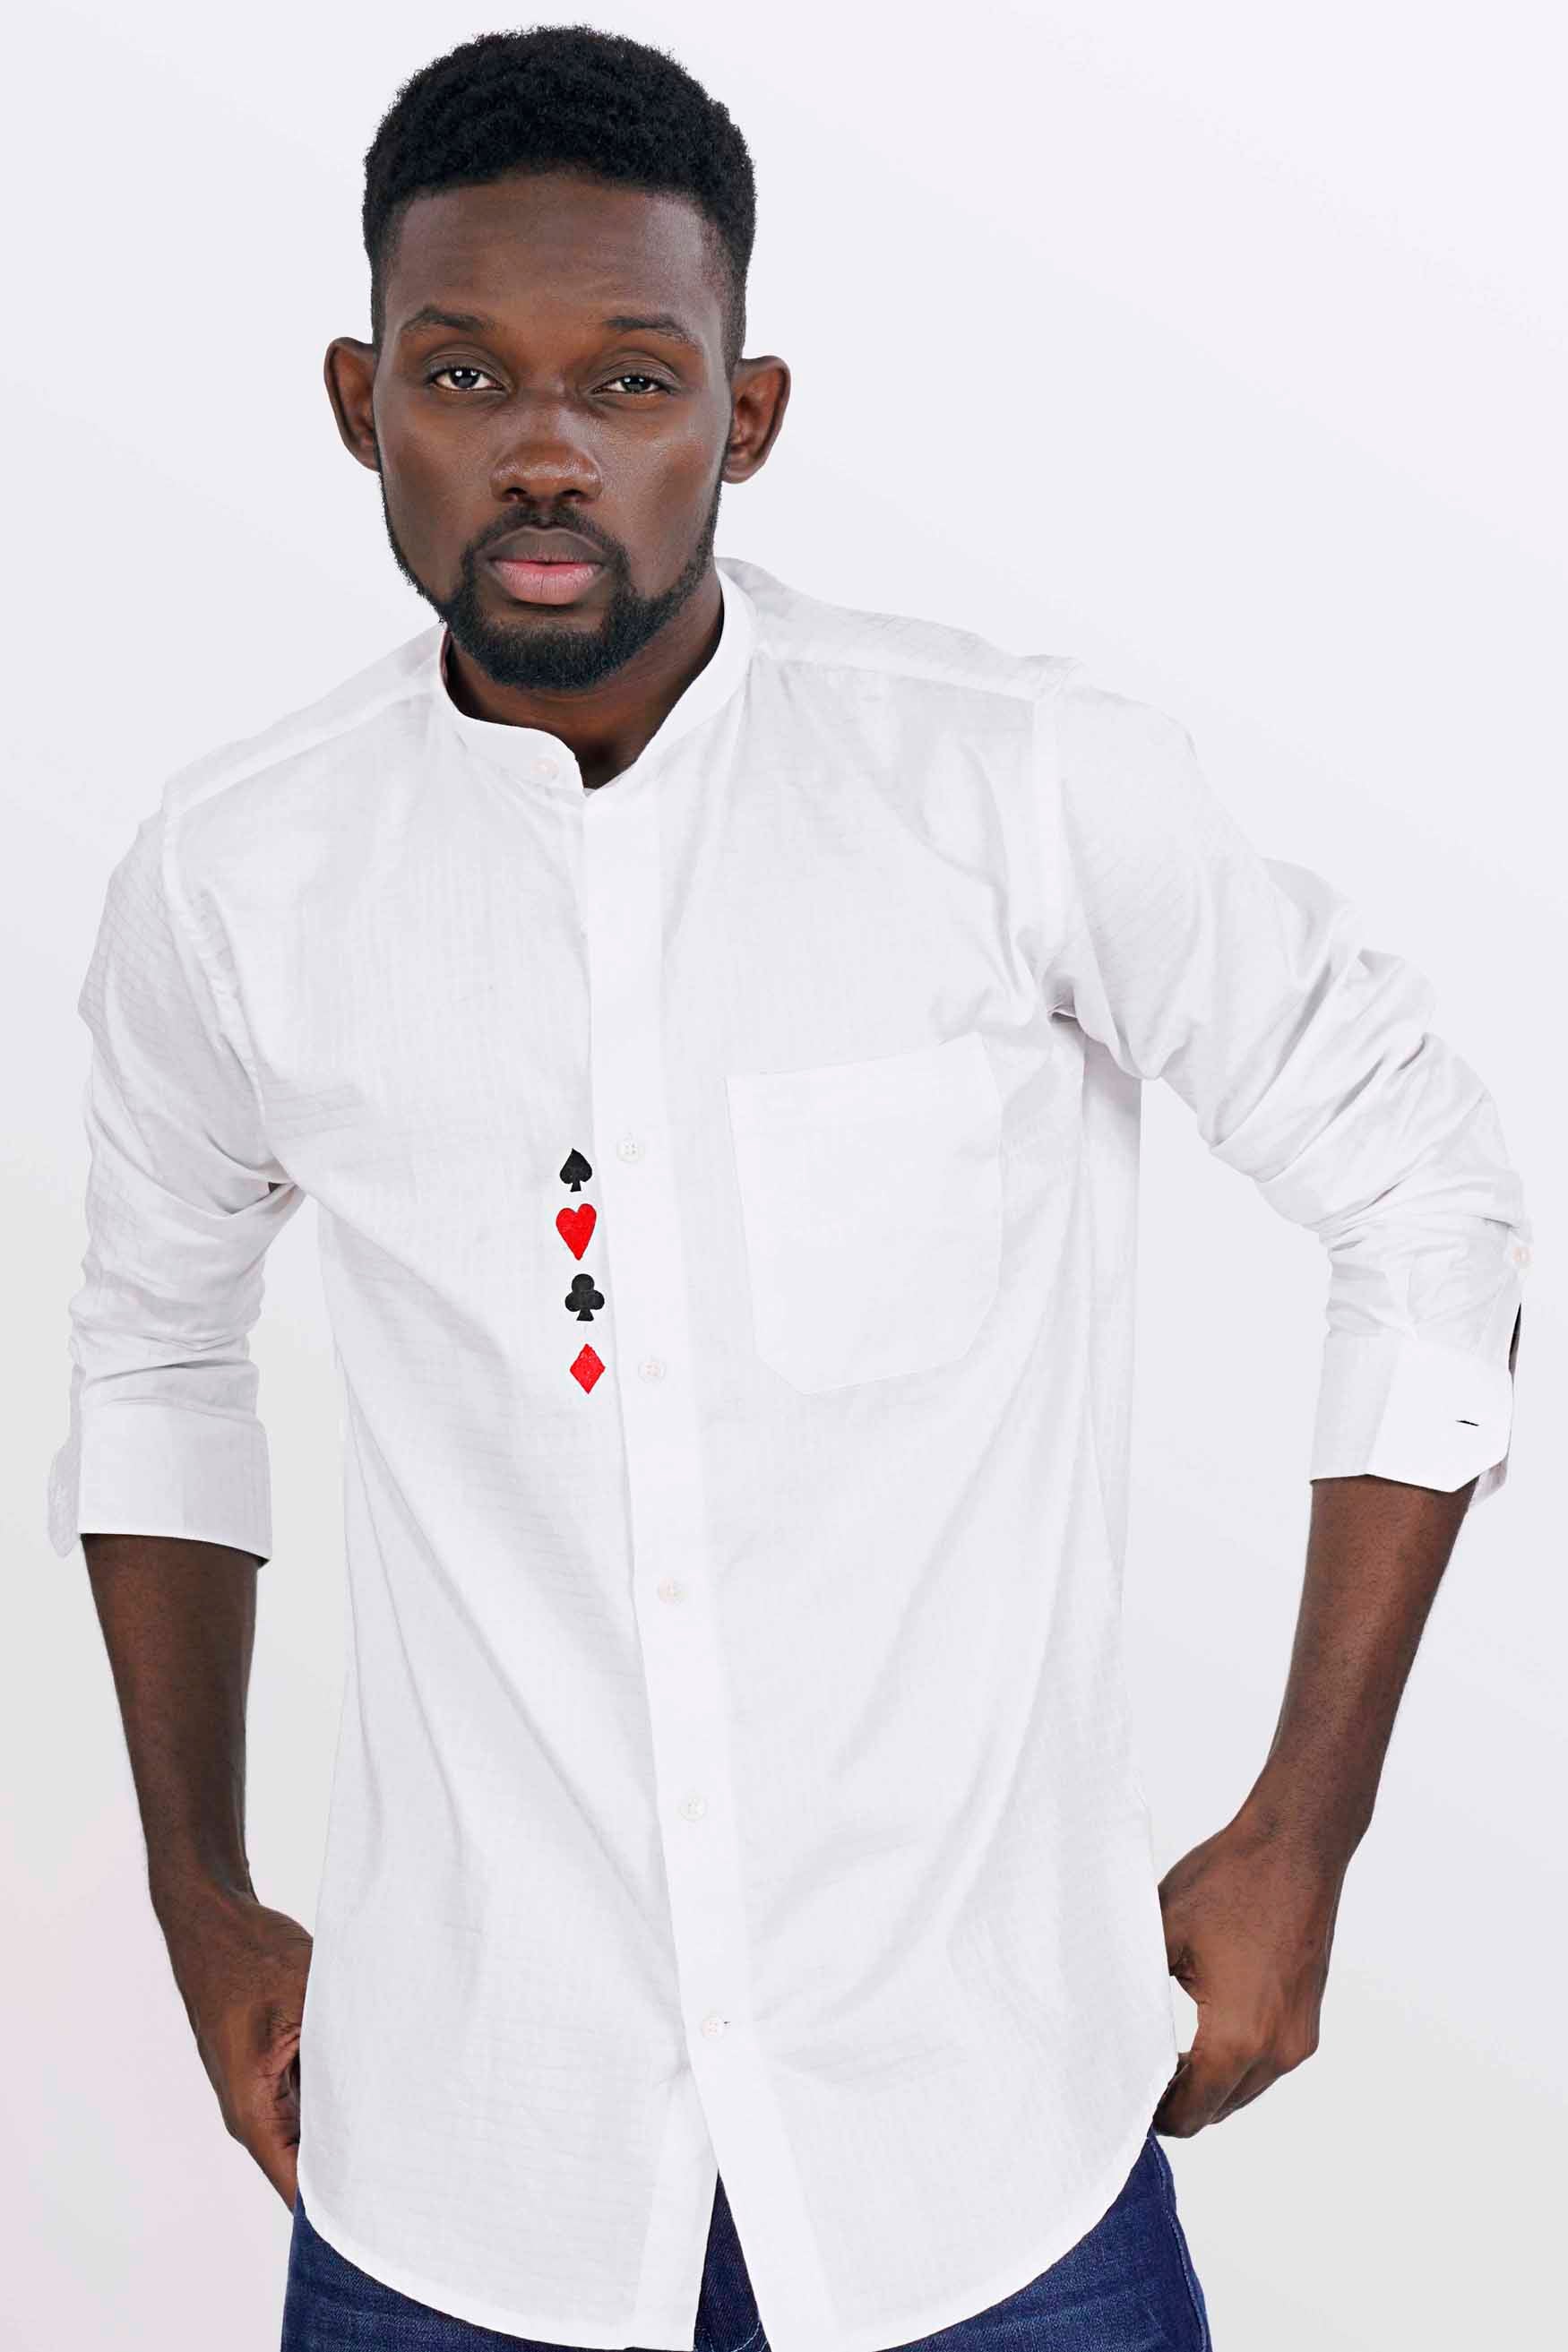 Bright White with Guardsman Red and Black Hand Painted Dobby Textured Premium Giza Cotton Shirt 6334-M-ART-38, 6334-M-ART-H-38, 6334-M-ART-39, 6334-M-ART-H-39, 6334-M-ART-40, 6334-M-ART-H-40, 6334-M-ART-42, 6334-M-ART-H-42, 6334-M-ART-44, 6334-M-ART-H-44, 6334-M-ART-46, 6334-M-ART-H-46, 6334-M-ART-48, 6334-M-ART-H-48, 6334-M-ART-50, 6334-M-ART-H-50, 6334-M-ART-52, 6334-M-ART-H-52